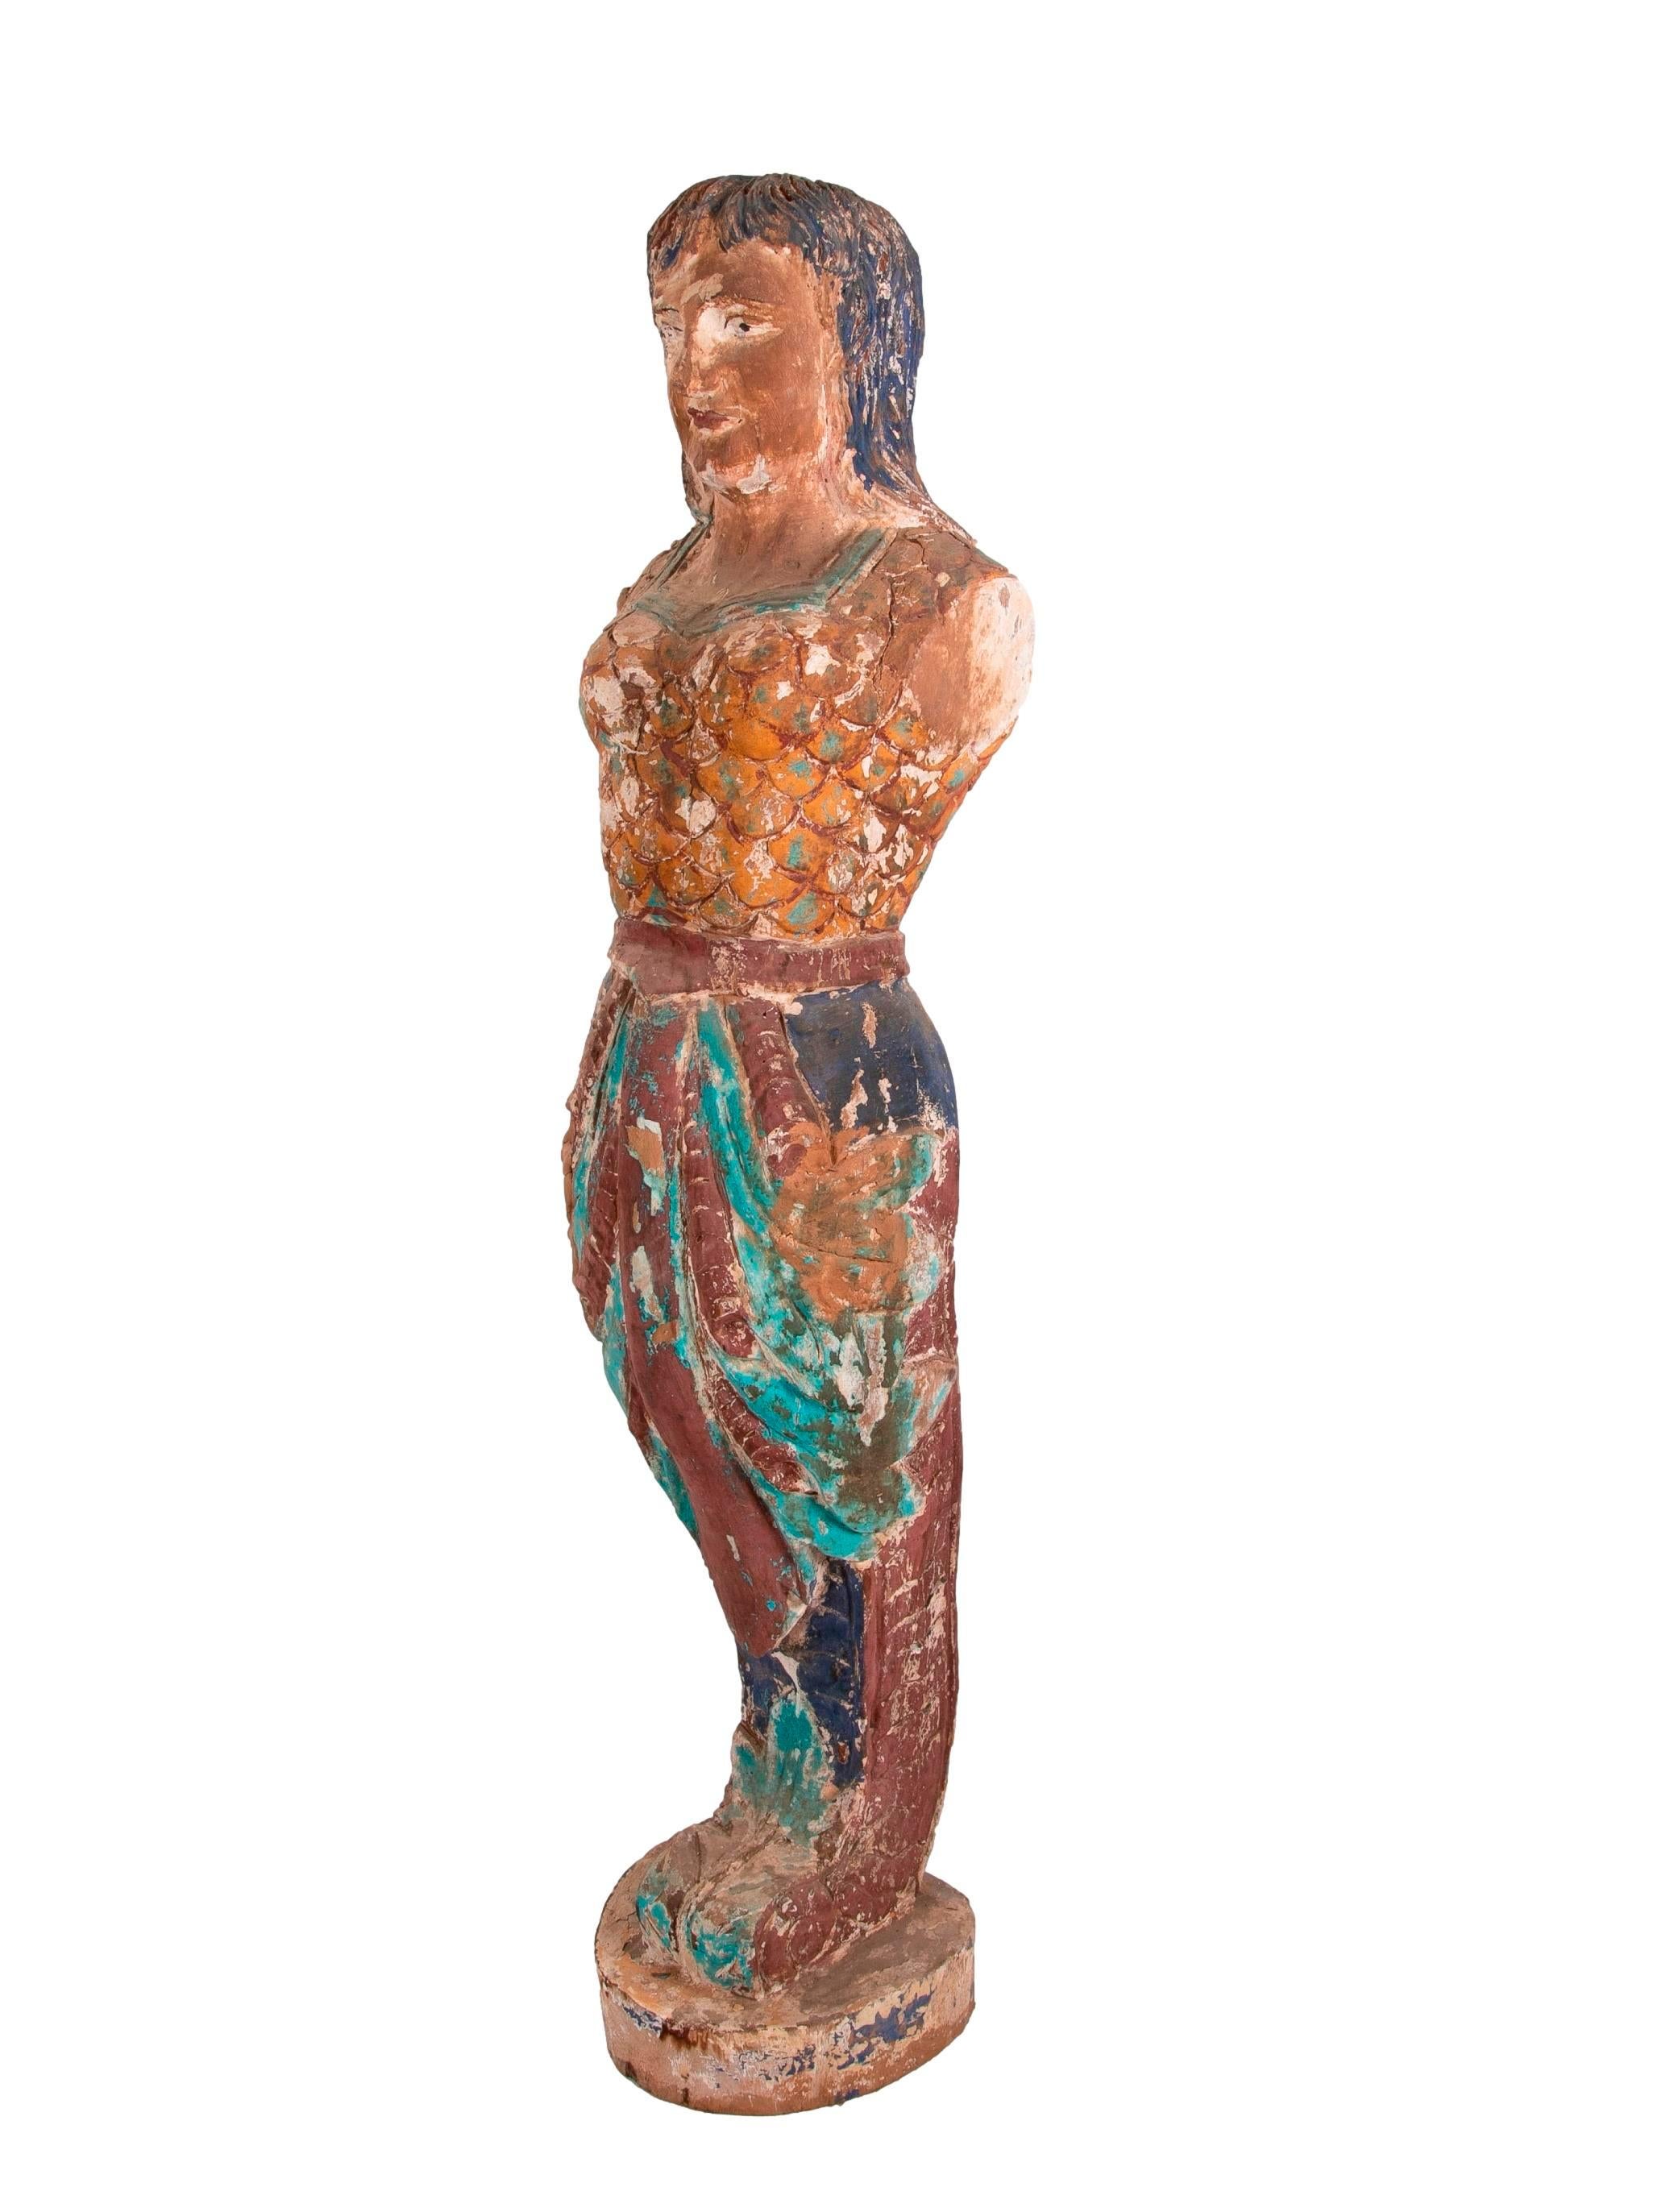 Vintage 1990s Spanish hand carved wooden painted mermaid sculpture, reminiscent of a boats figurehead.